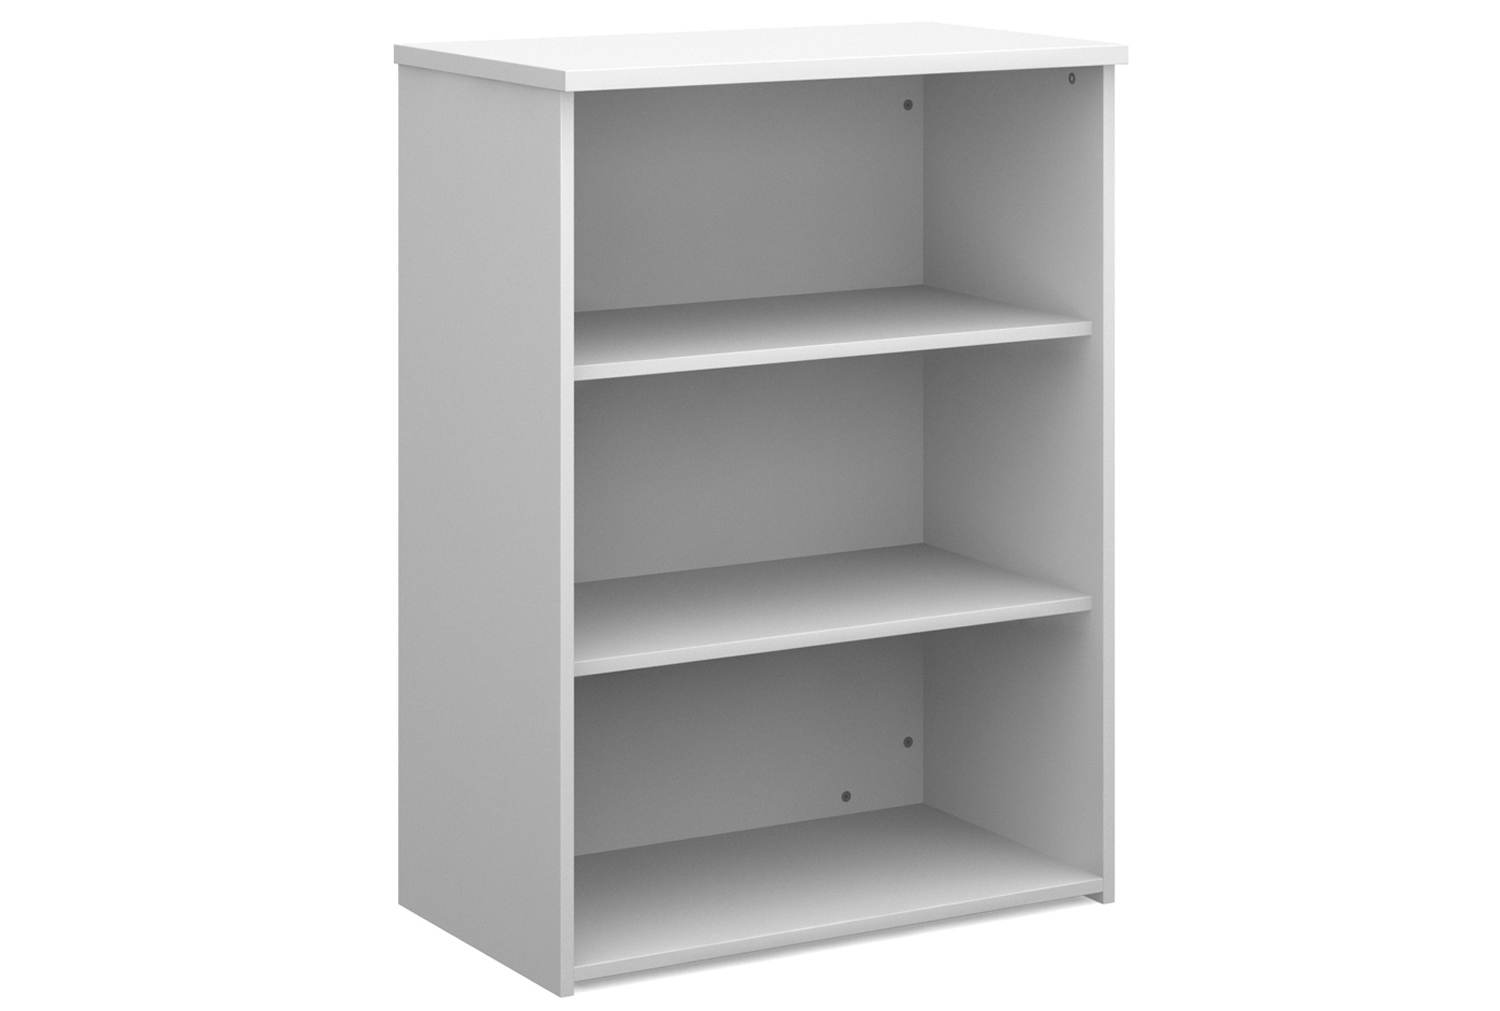 Strive Home Office Bookcase